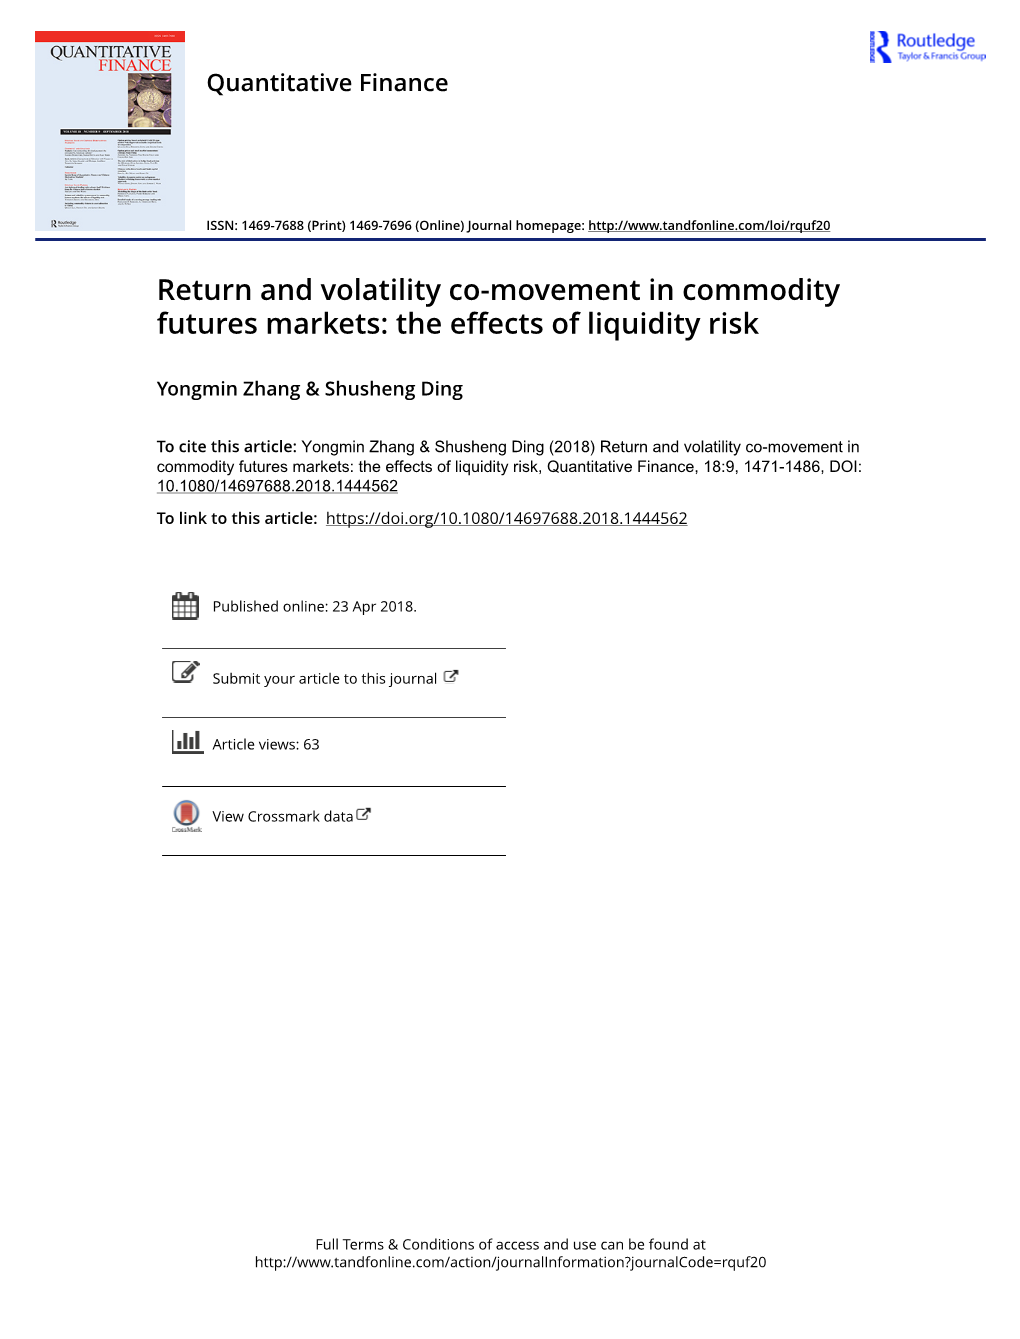 Return and Volatility Co-Movement in Commodity Futures Markets: the Effects of Liquidity Risk